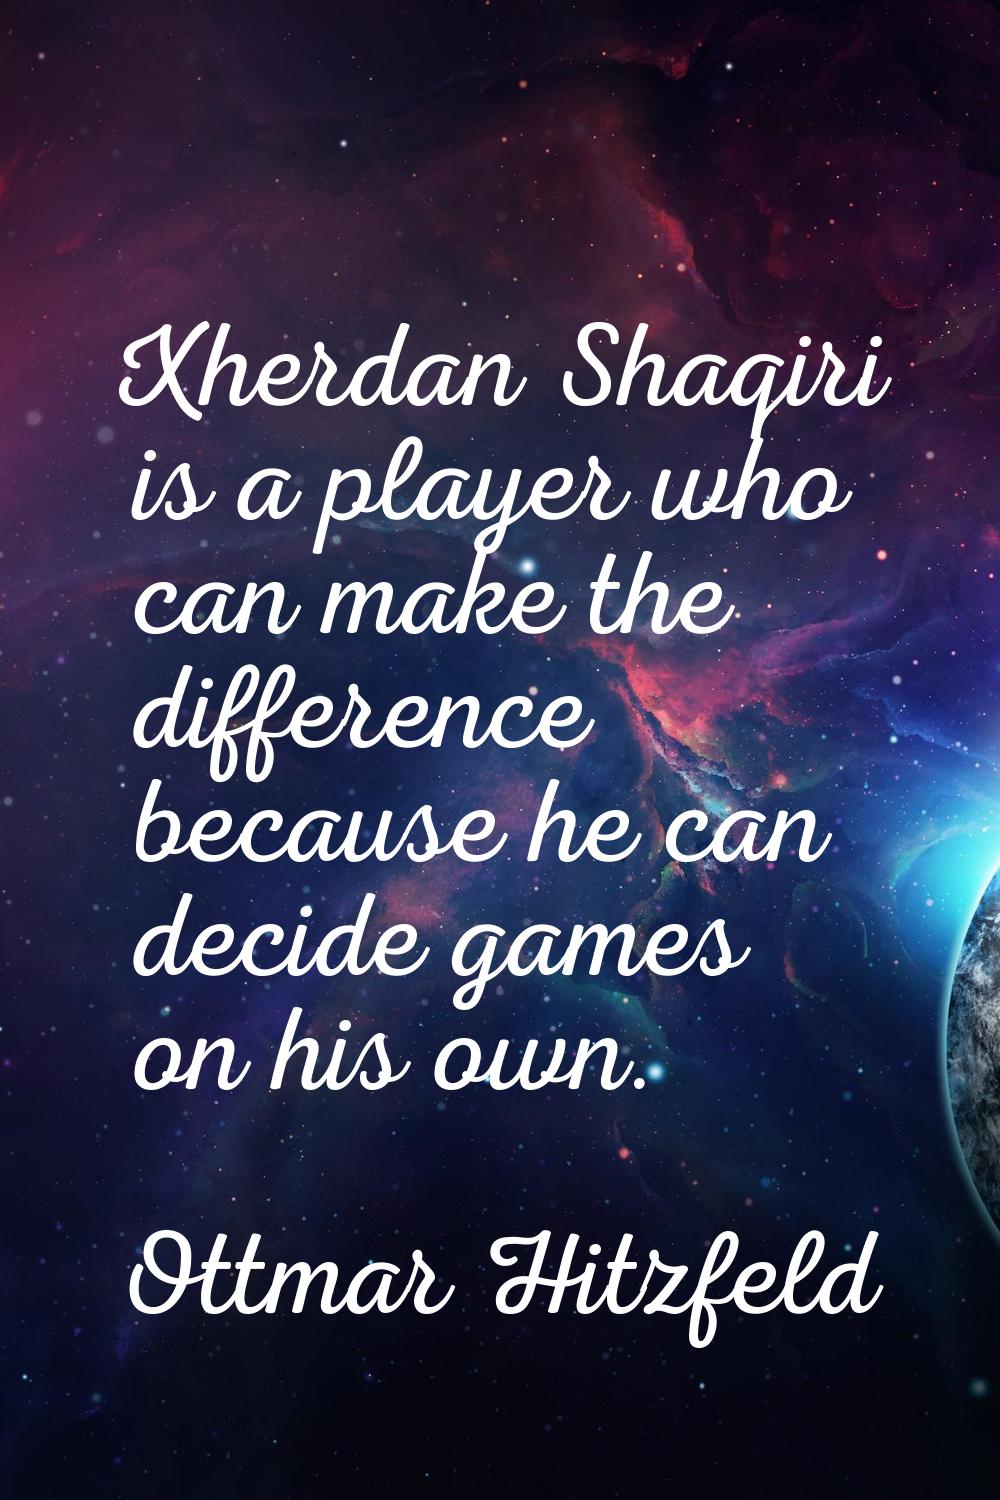 Xherdan Shaqiri is a player who can make the difference because he can decide games on his own.